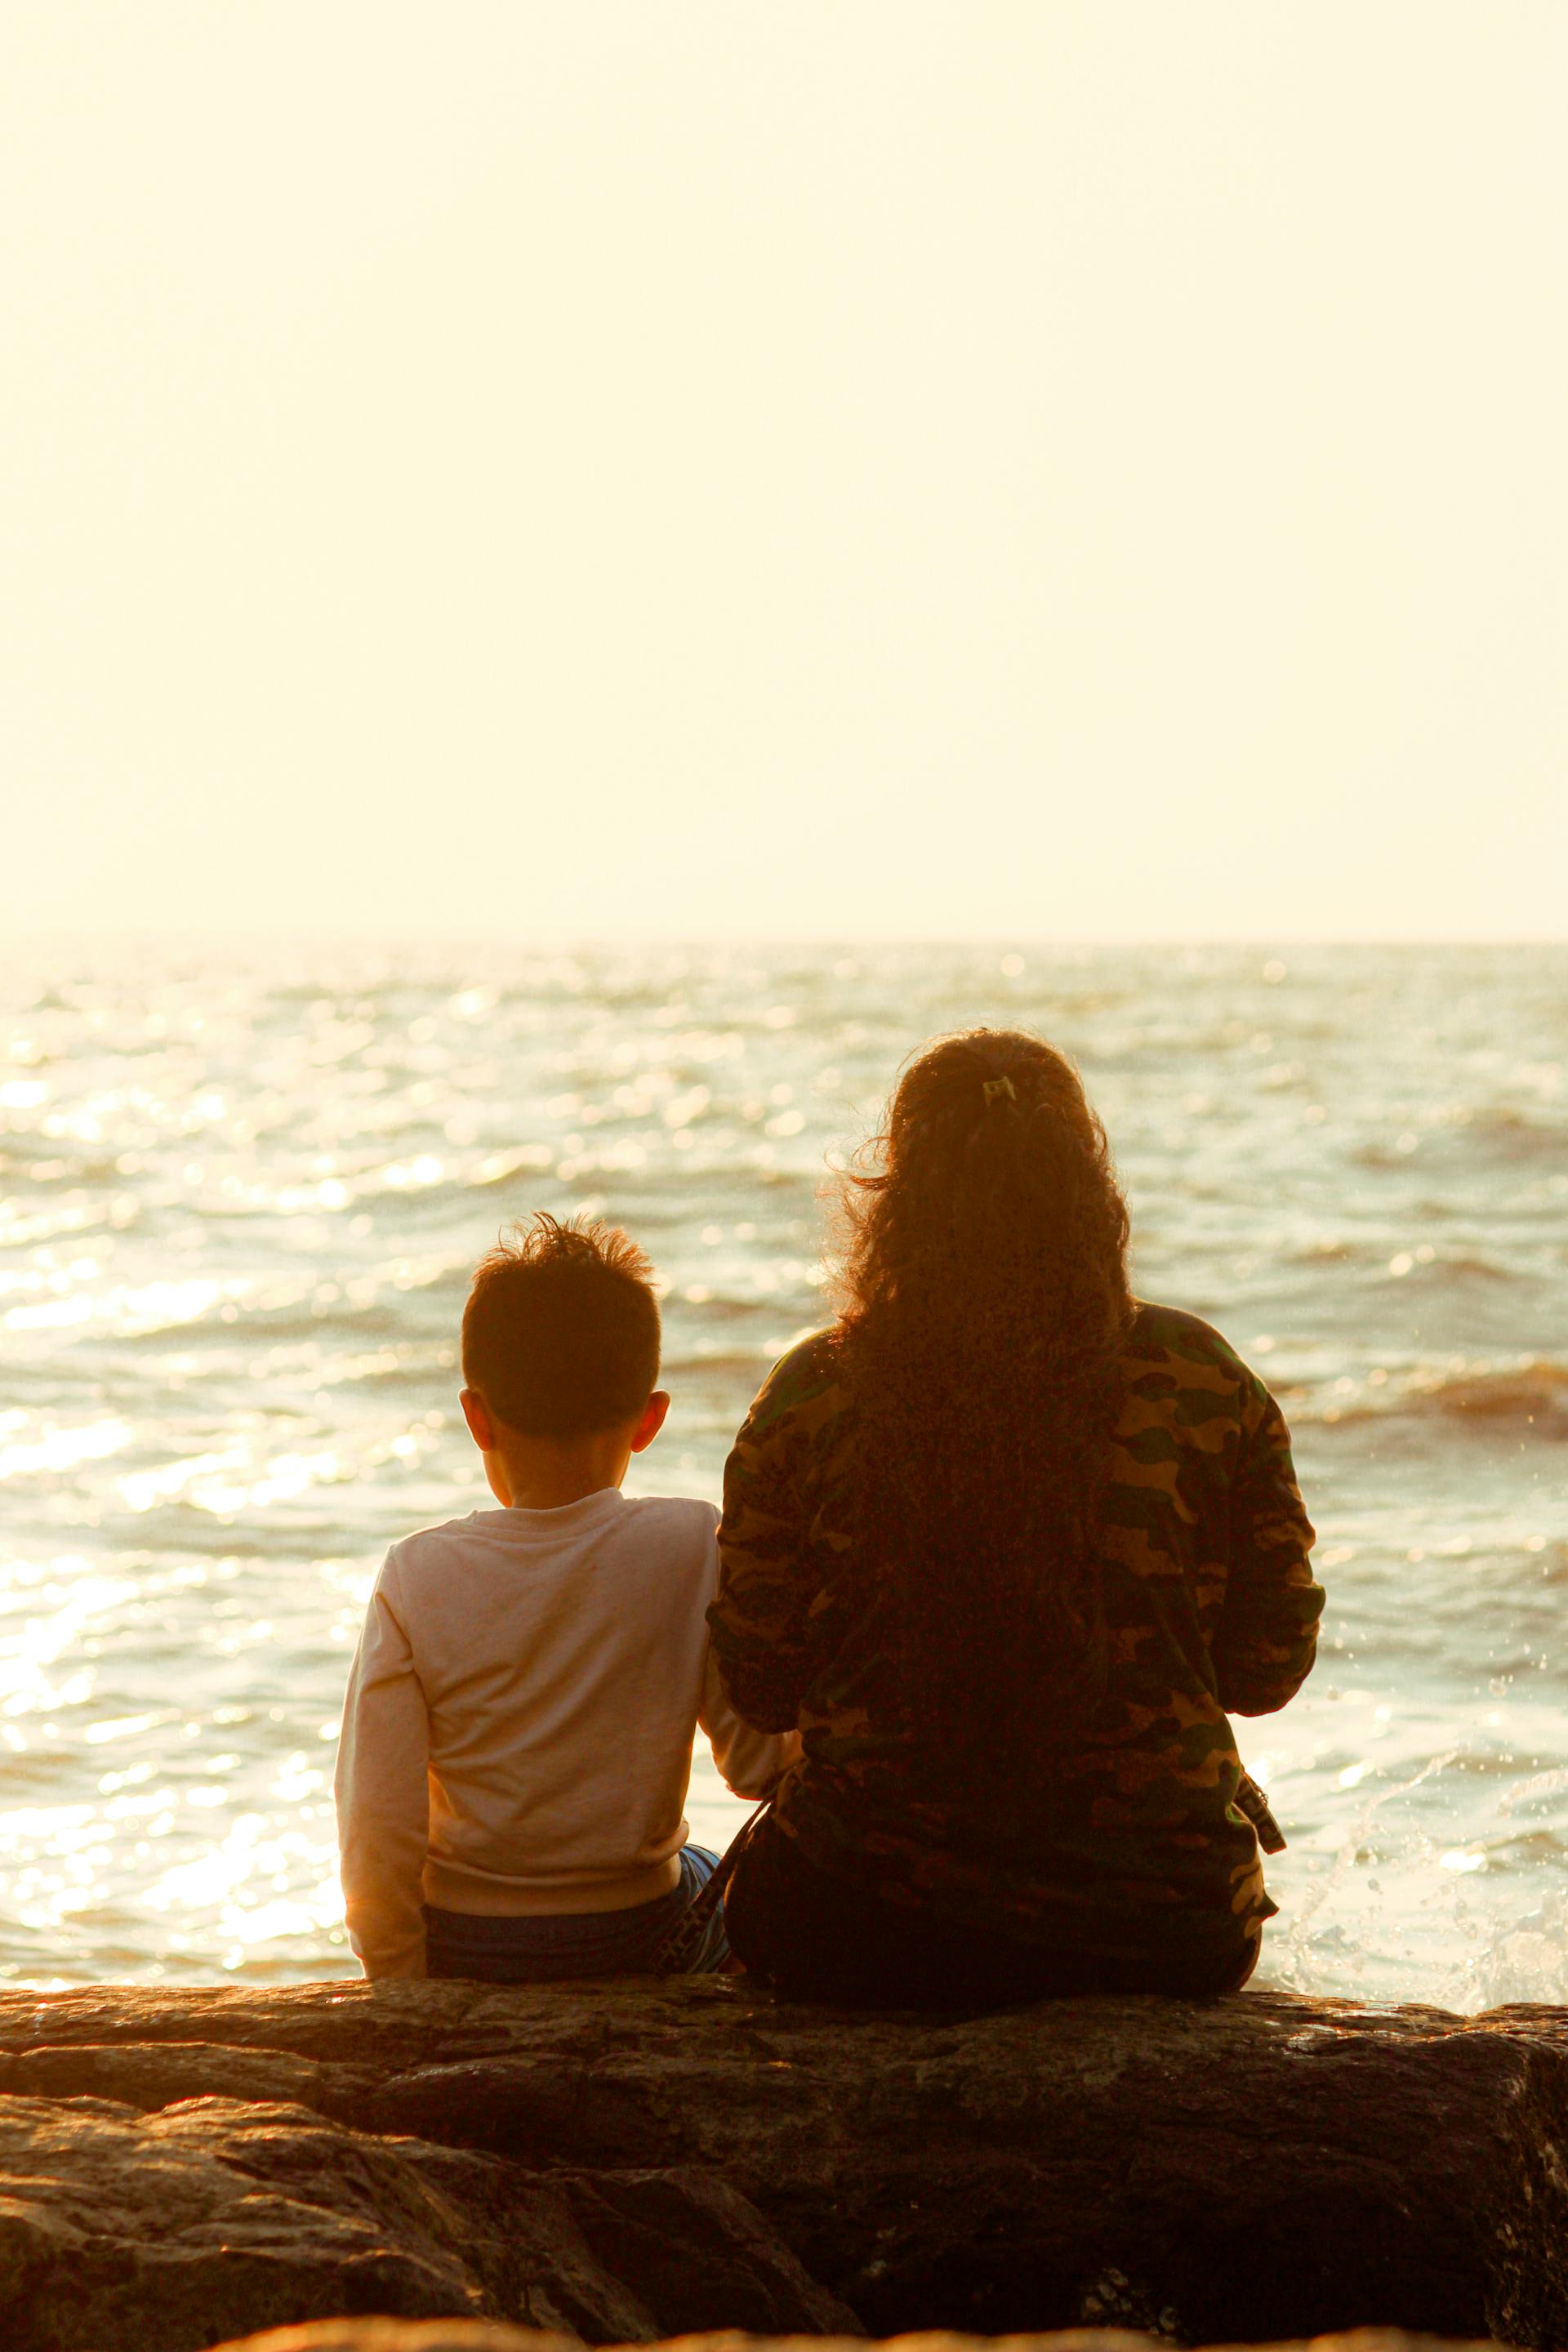 A mother sitting with her son on the seashore | Source: Pexels